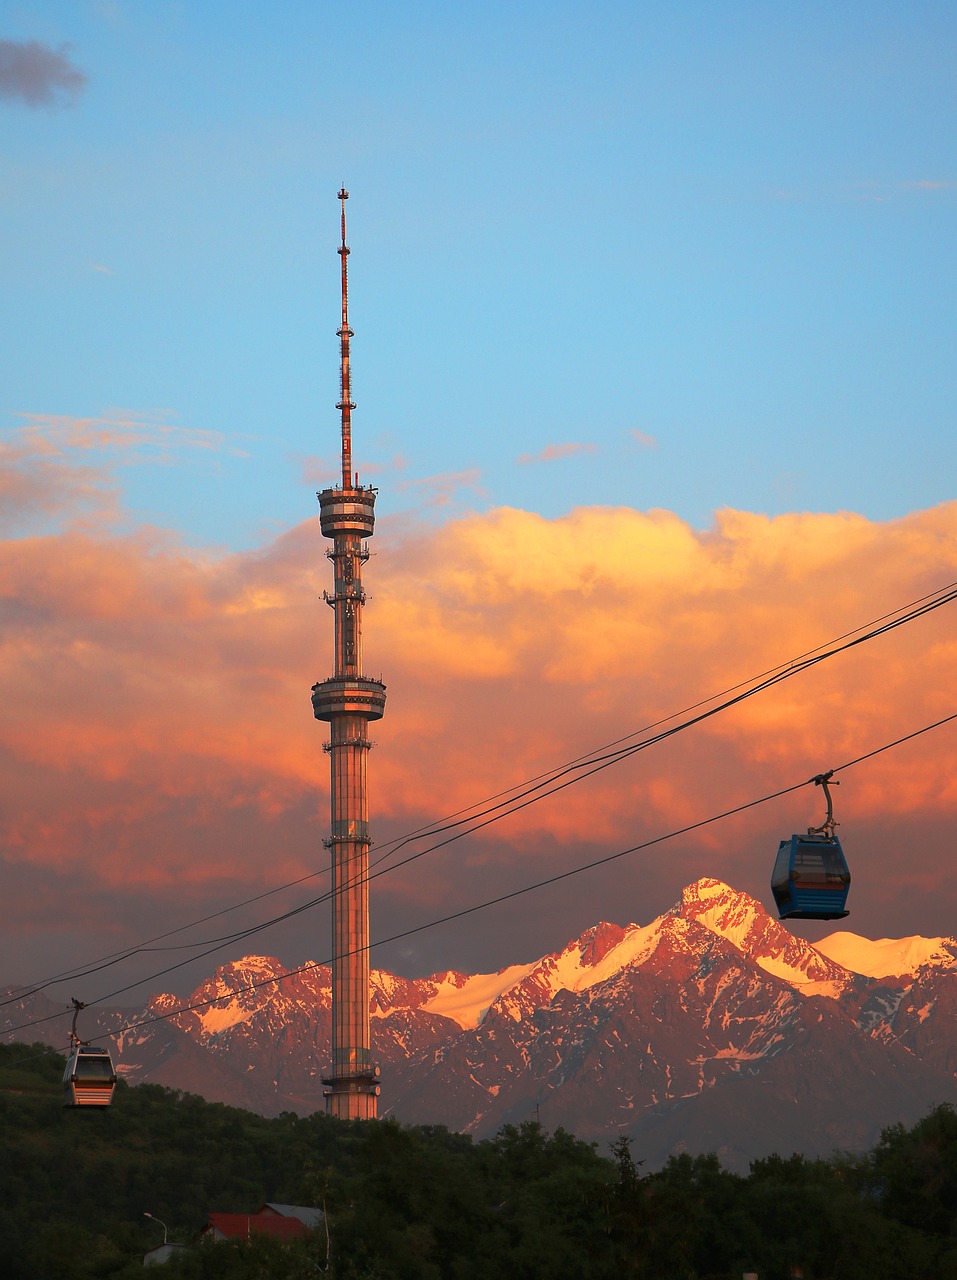 Best of Almaty in 3 Days: Lakes, Canyons, and City Sights